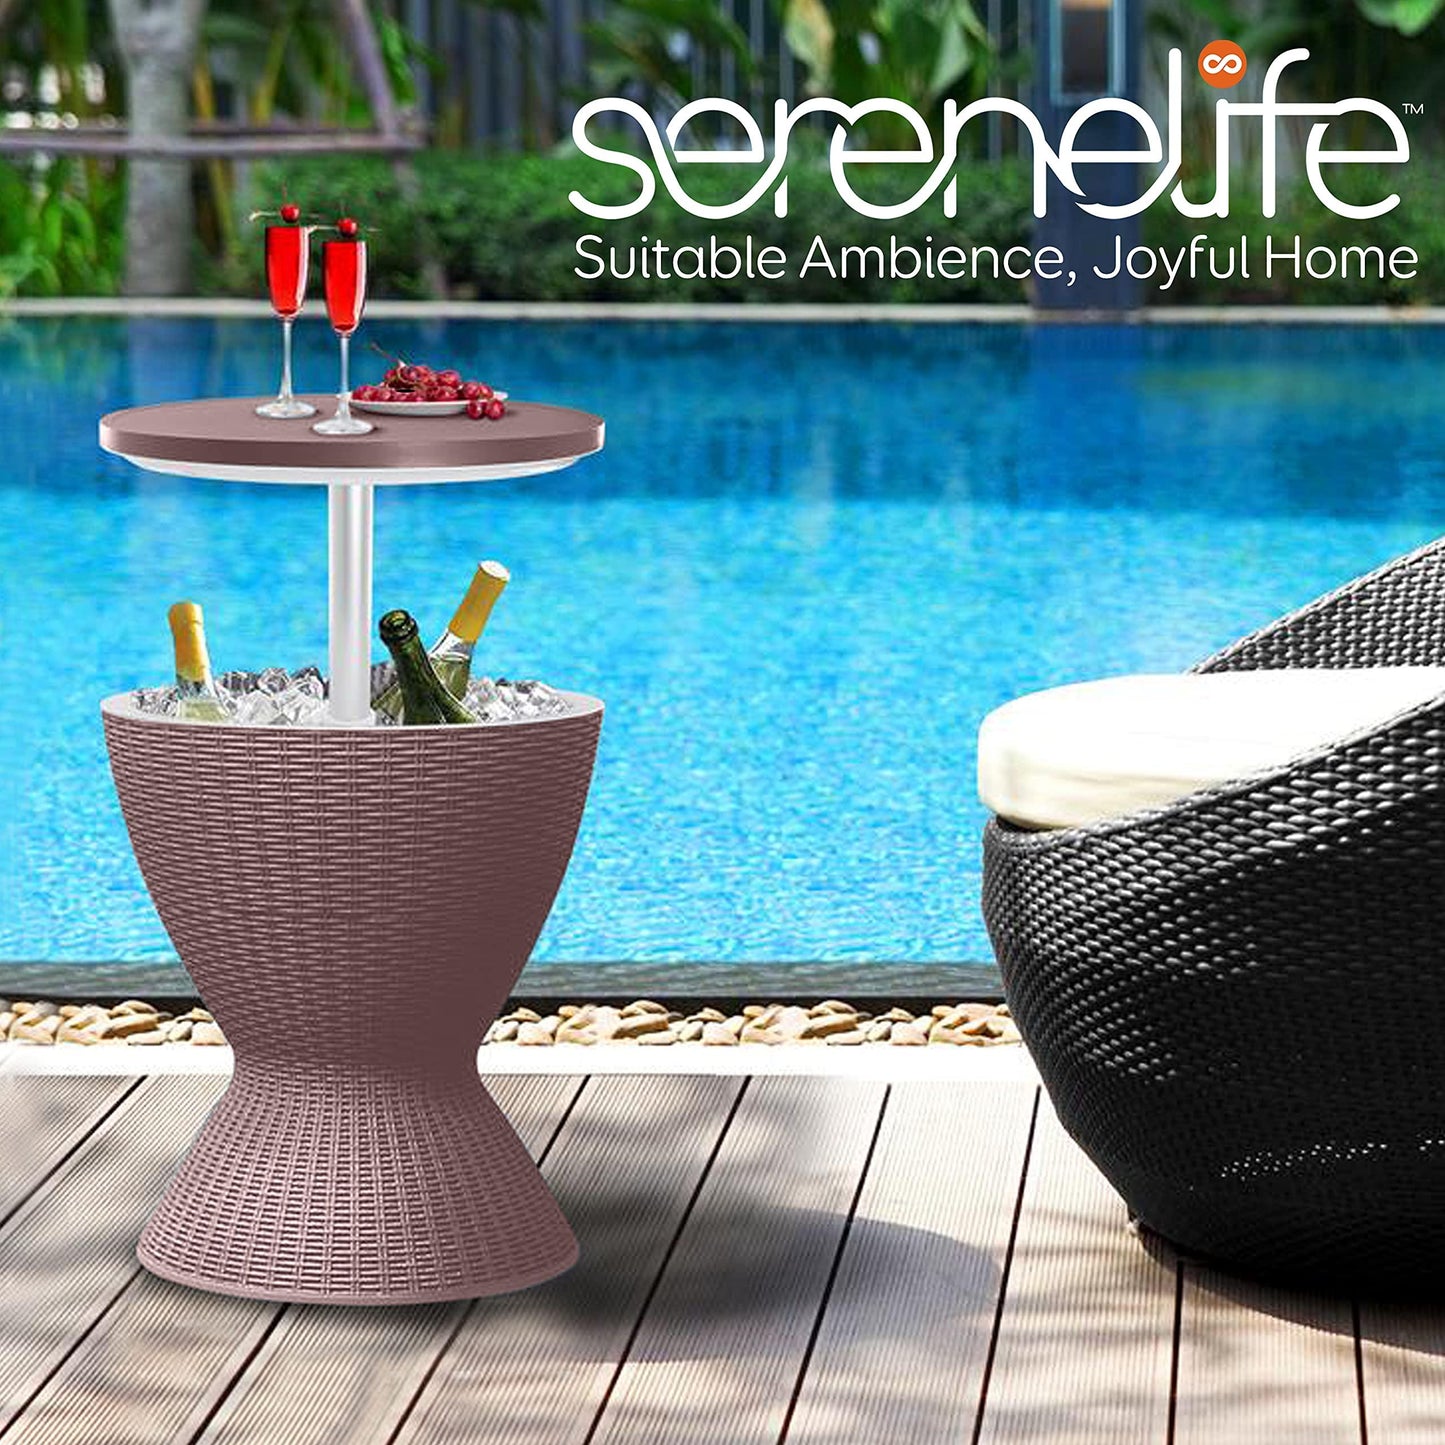 SereneLife Outdoor Cool Bar Table, 7.5 Gallon Beer and Wine Cooler, Patio Furniture & Hot Tub Side Table, Beverage Cooler, All-Weather Resistant Ice Cool Bar, Rattan Style Patio, Cocktail Bar (Grey) - CookCave